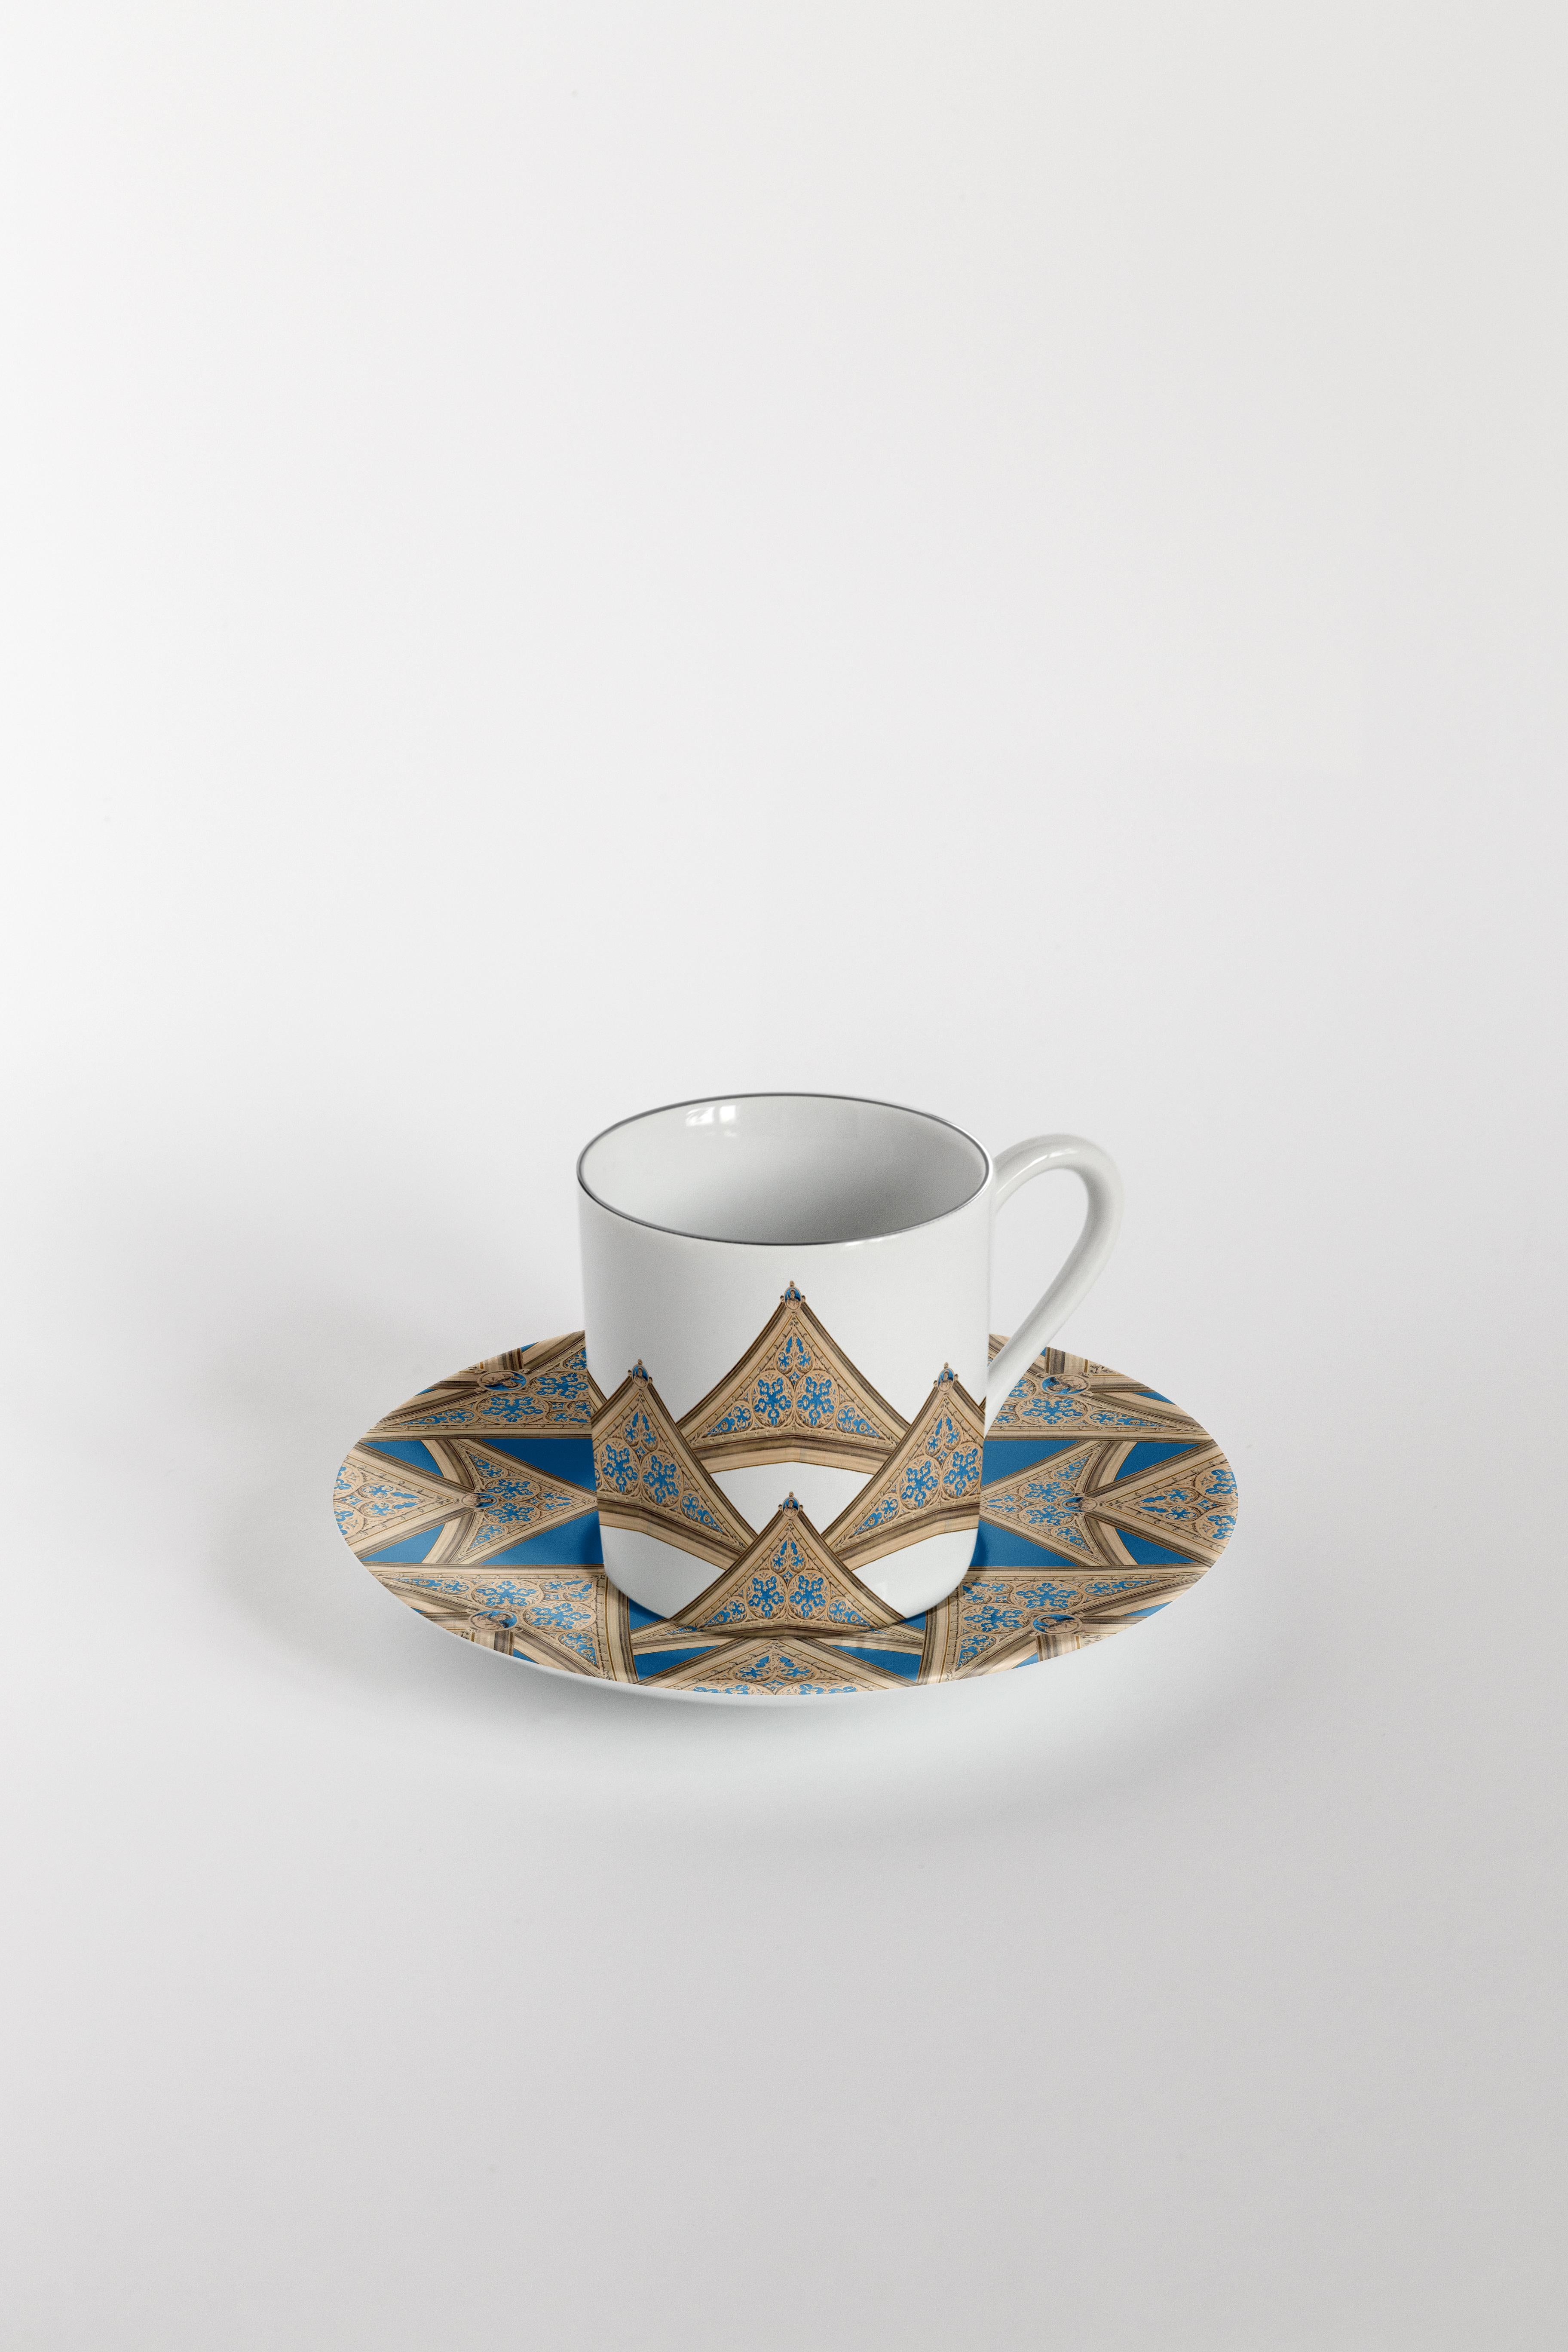 Porcelain Le Volte Celesti, Six Contemporary Decorated Coffee Cups with Plates For Sale